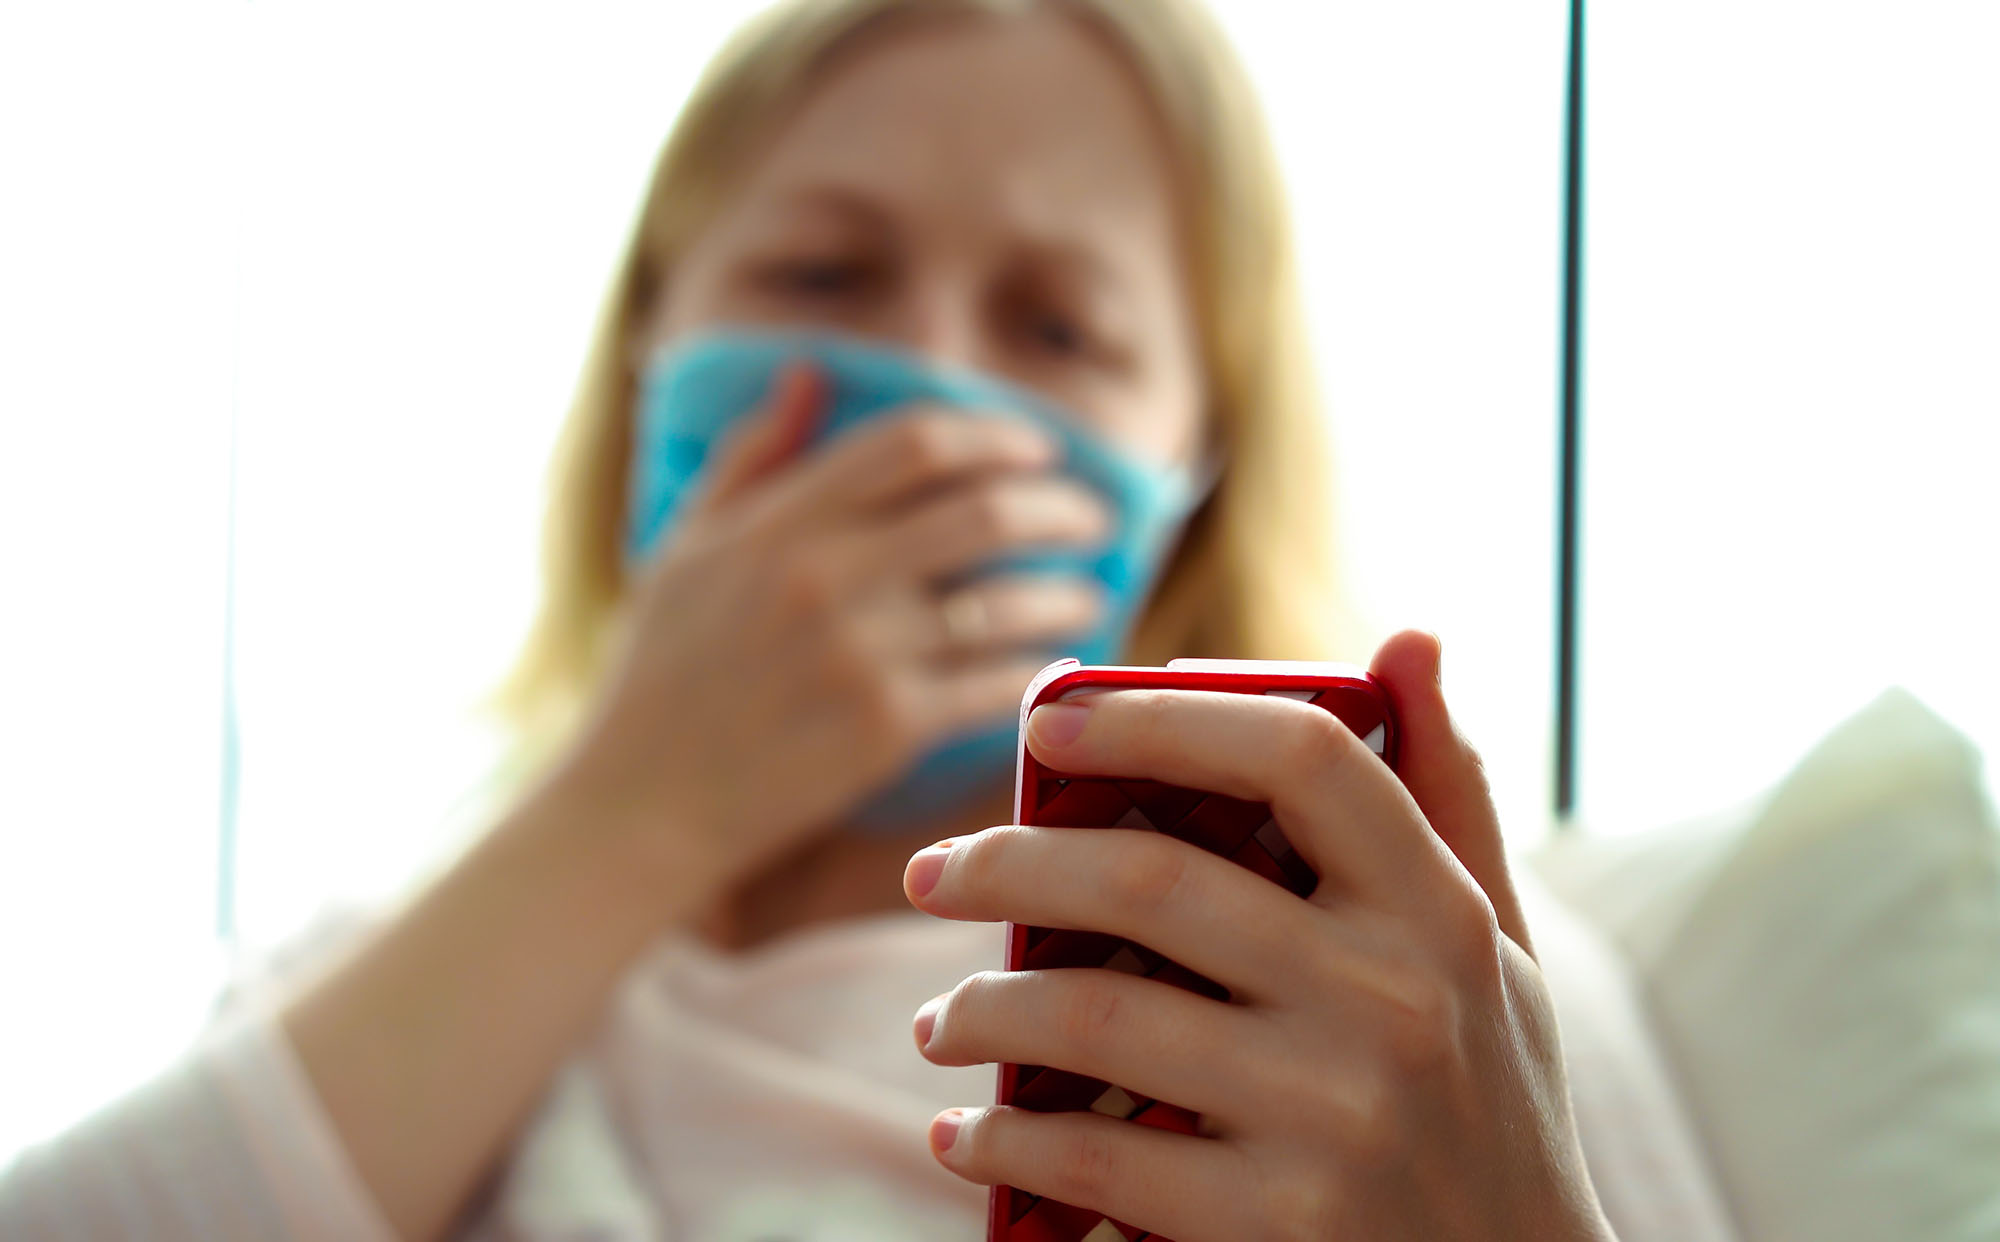 PHOTO: A sick woman holds a smartphone in an undated stock image.